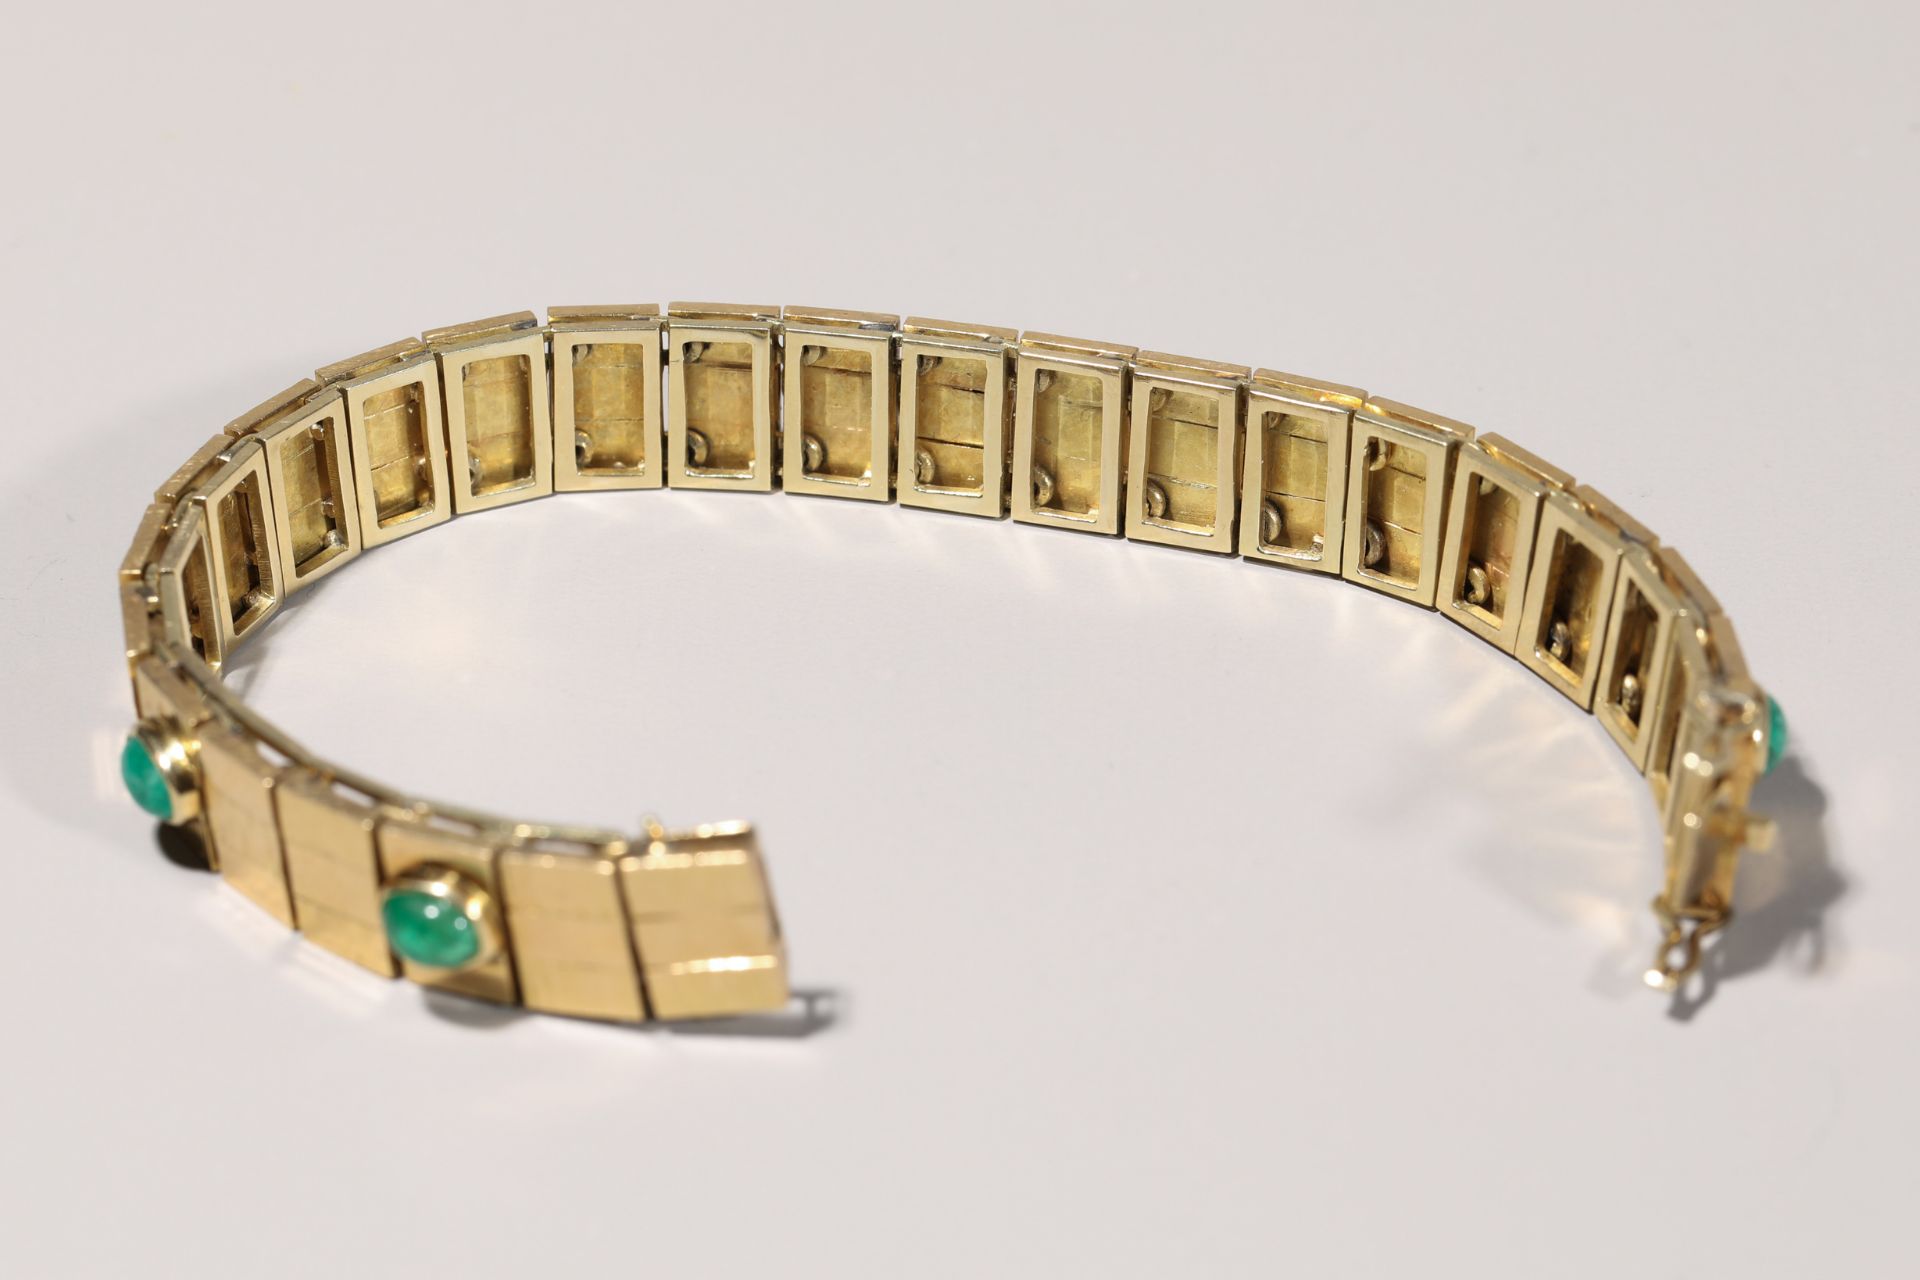 Gold bracelet with emerald cabochons - Image 6 of 7